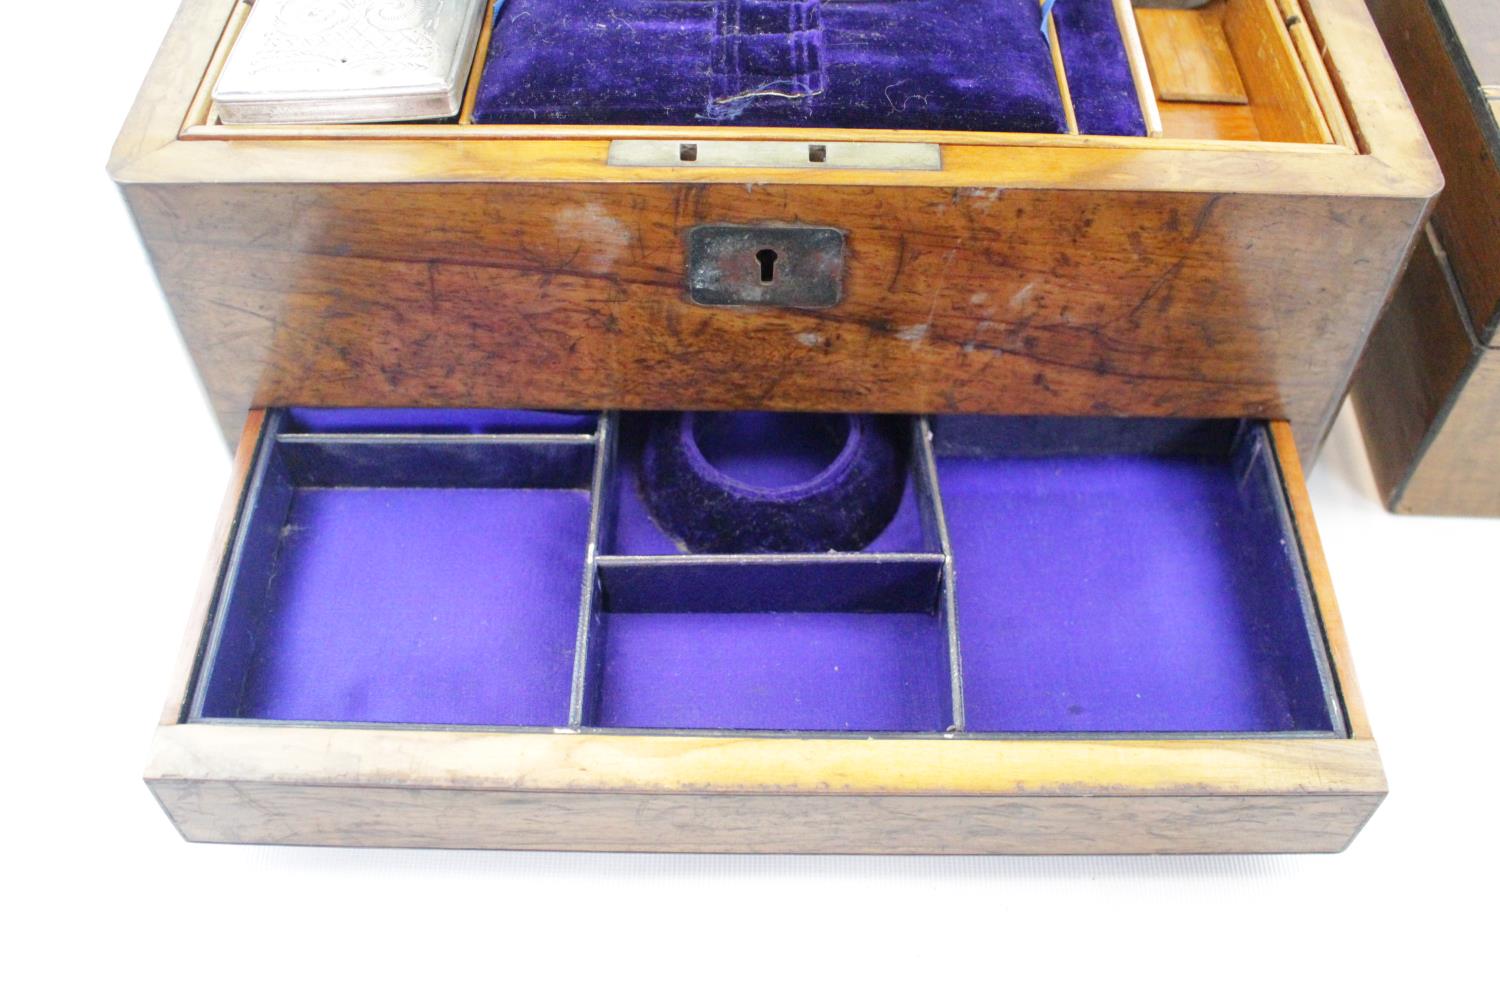 Late 19thC Walnut ladies travelling case with fitted interior and a Inlaid stationary/Jewel box - Image 3 of 4